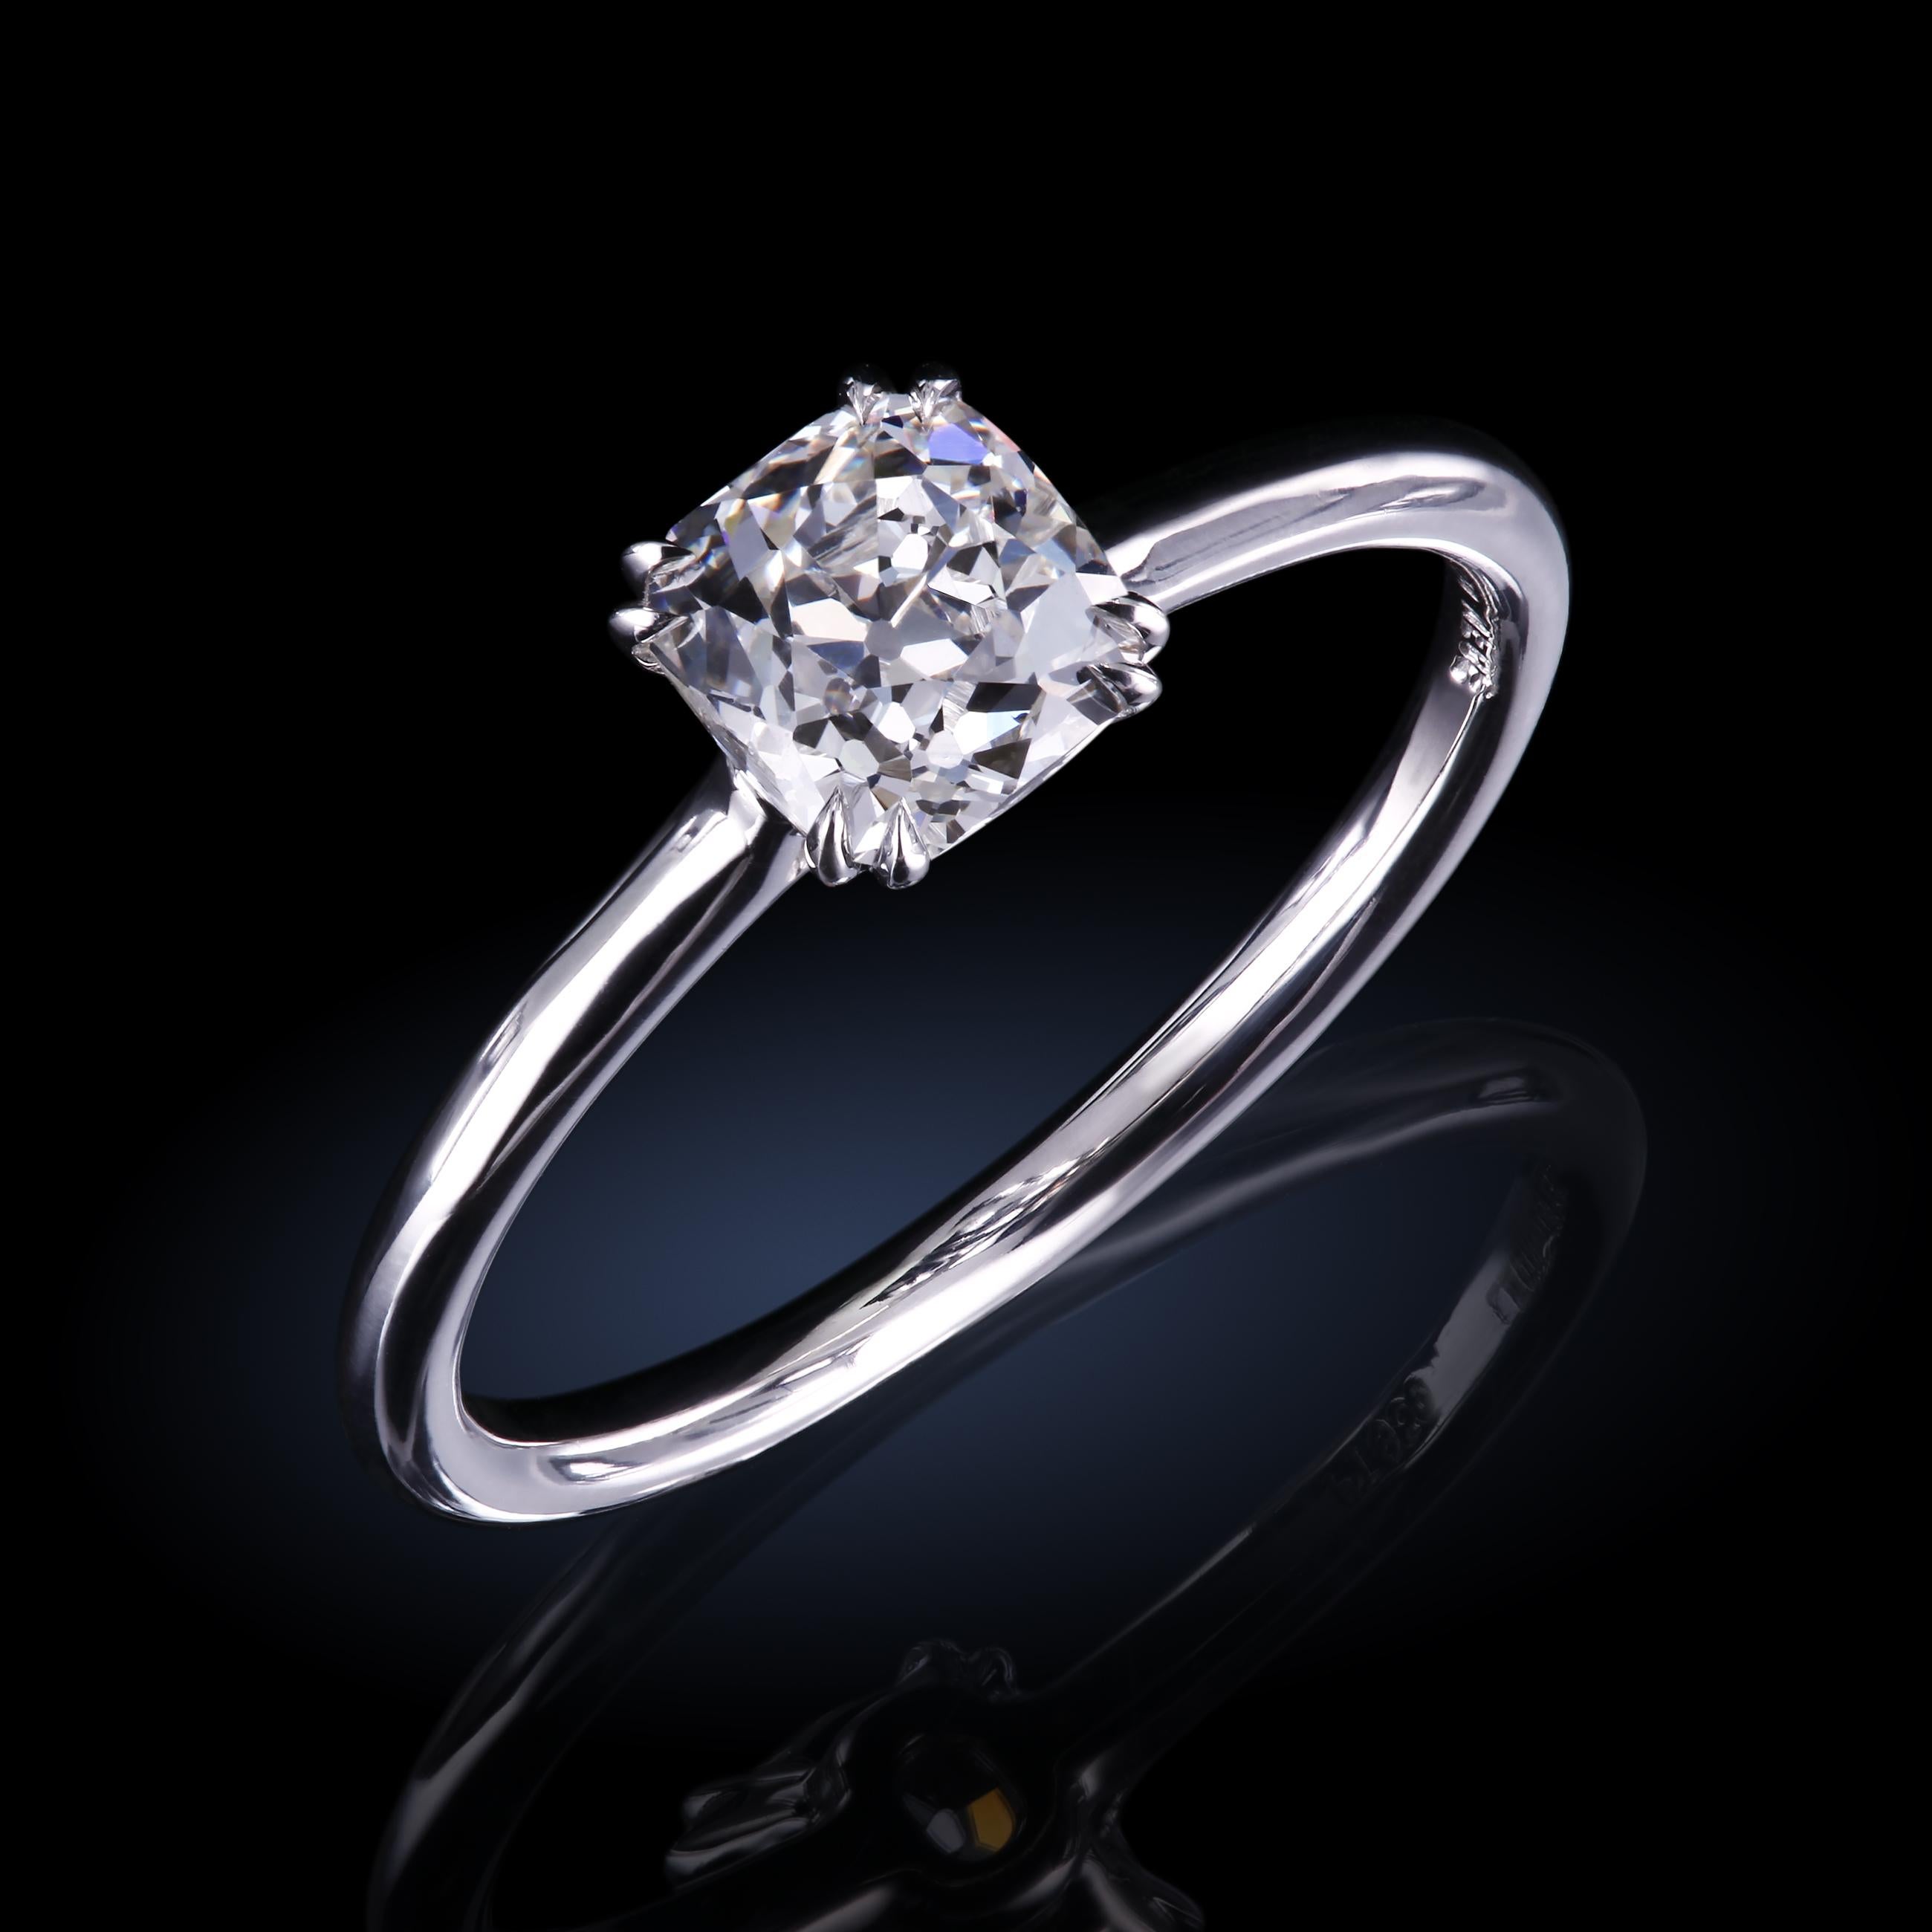 Imbuing memories into an elegant temple of beauty does not require a giant rock but can be achieved with the sweet Princessa™ platinum solitaire featuring a lovely 0.83-carat GIA I/VS1 antique cushion diamond, GIA report #1122803334.

Finger size: